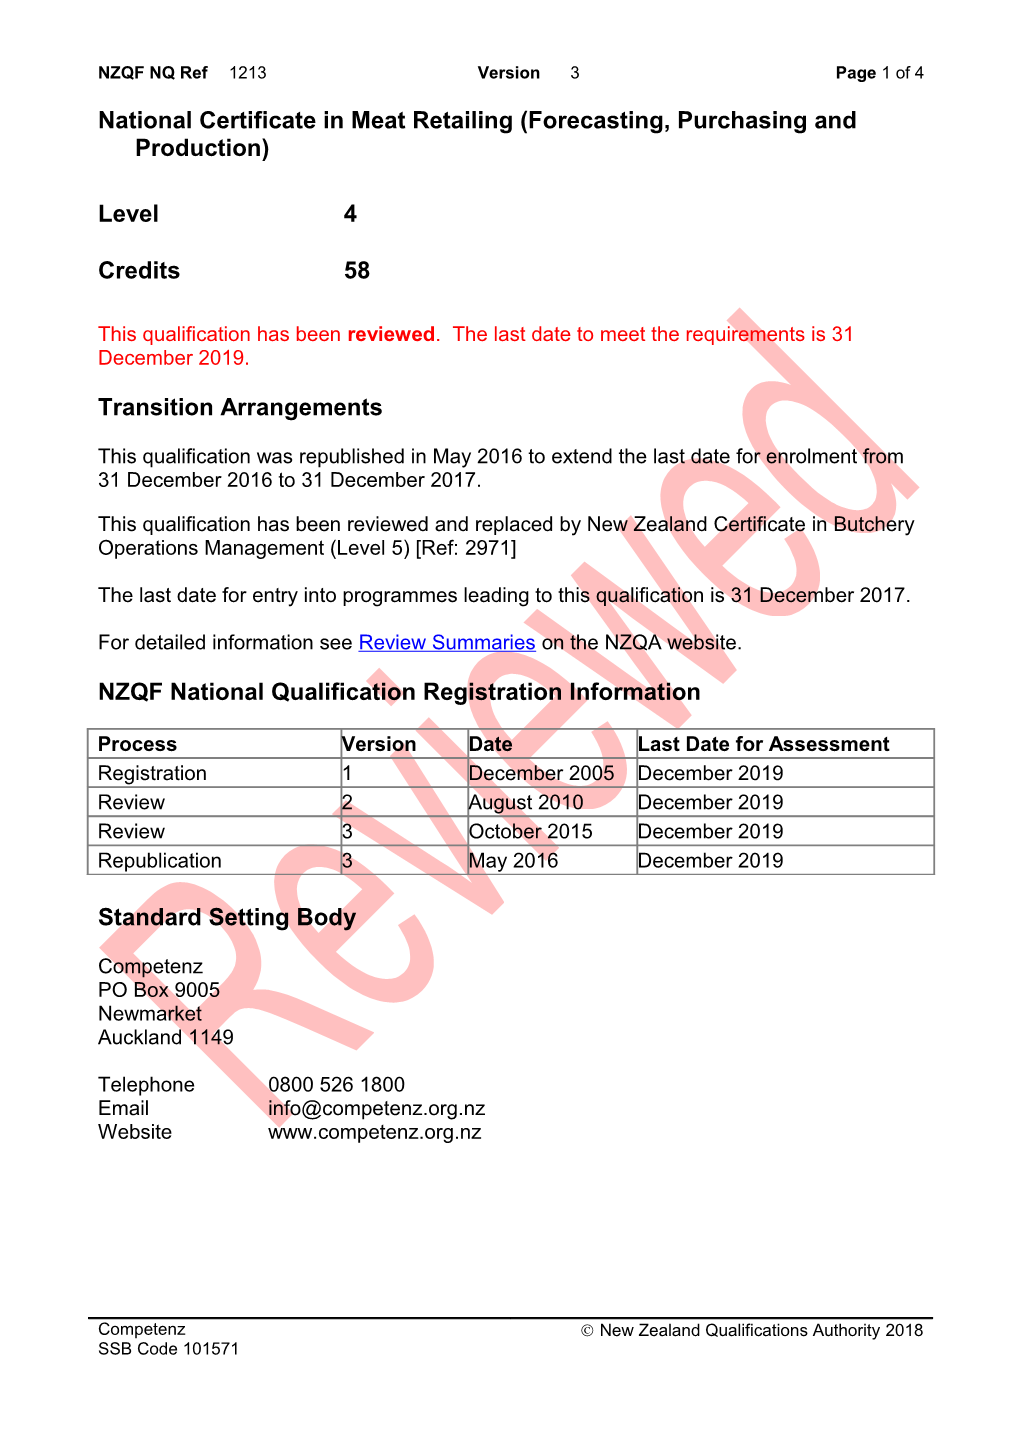 1213 National Certificate in Meat Retailing (Forecasting, Purchasing and Production)